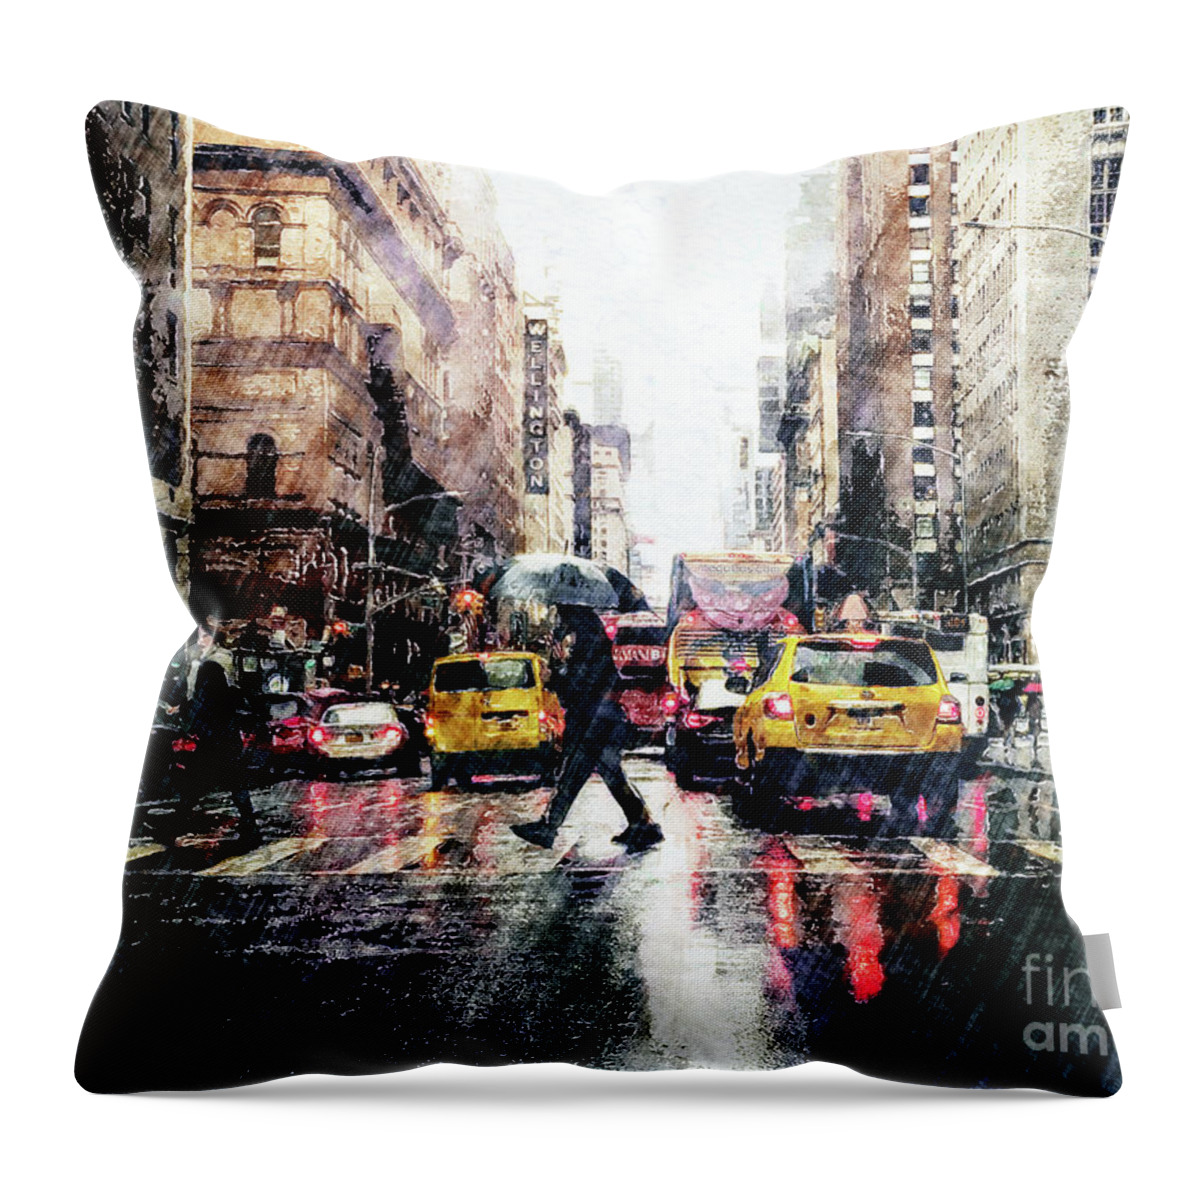 Urban Throw Pillow featuring the digital art Crossing Street With Umbrella by Phil Perkins